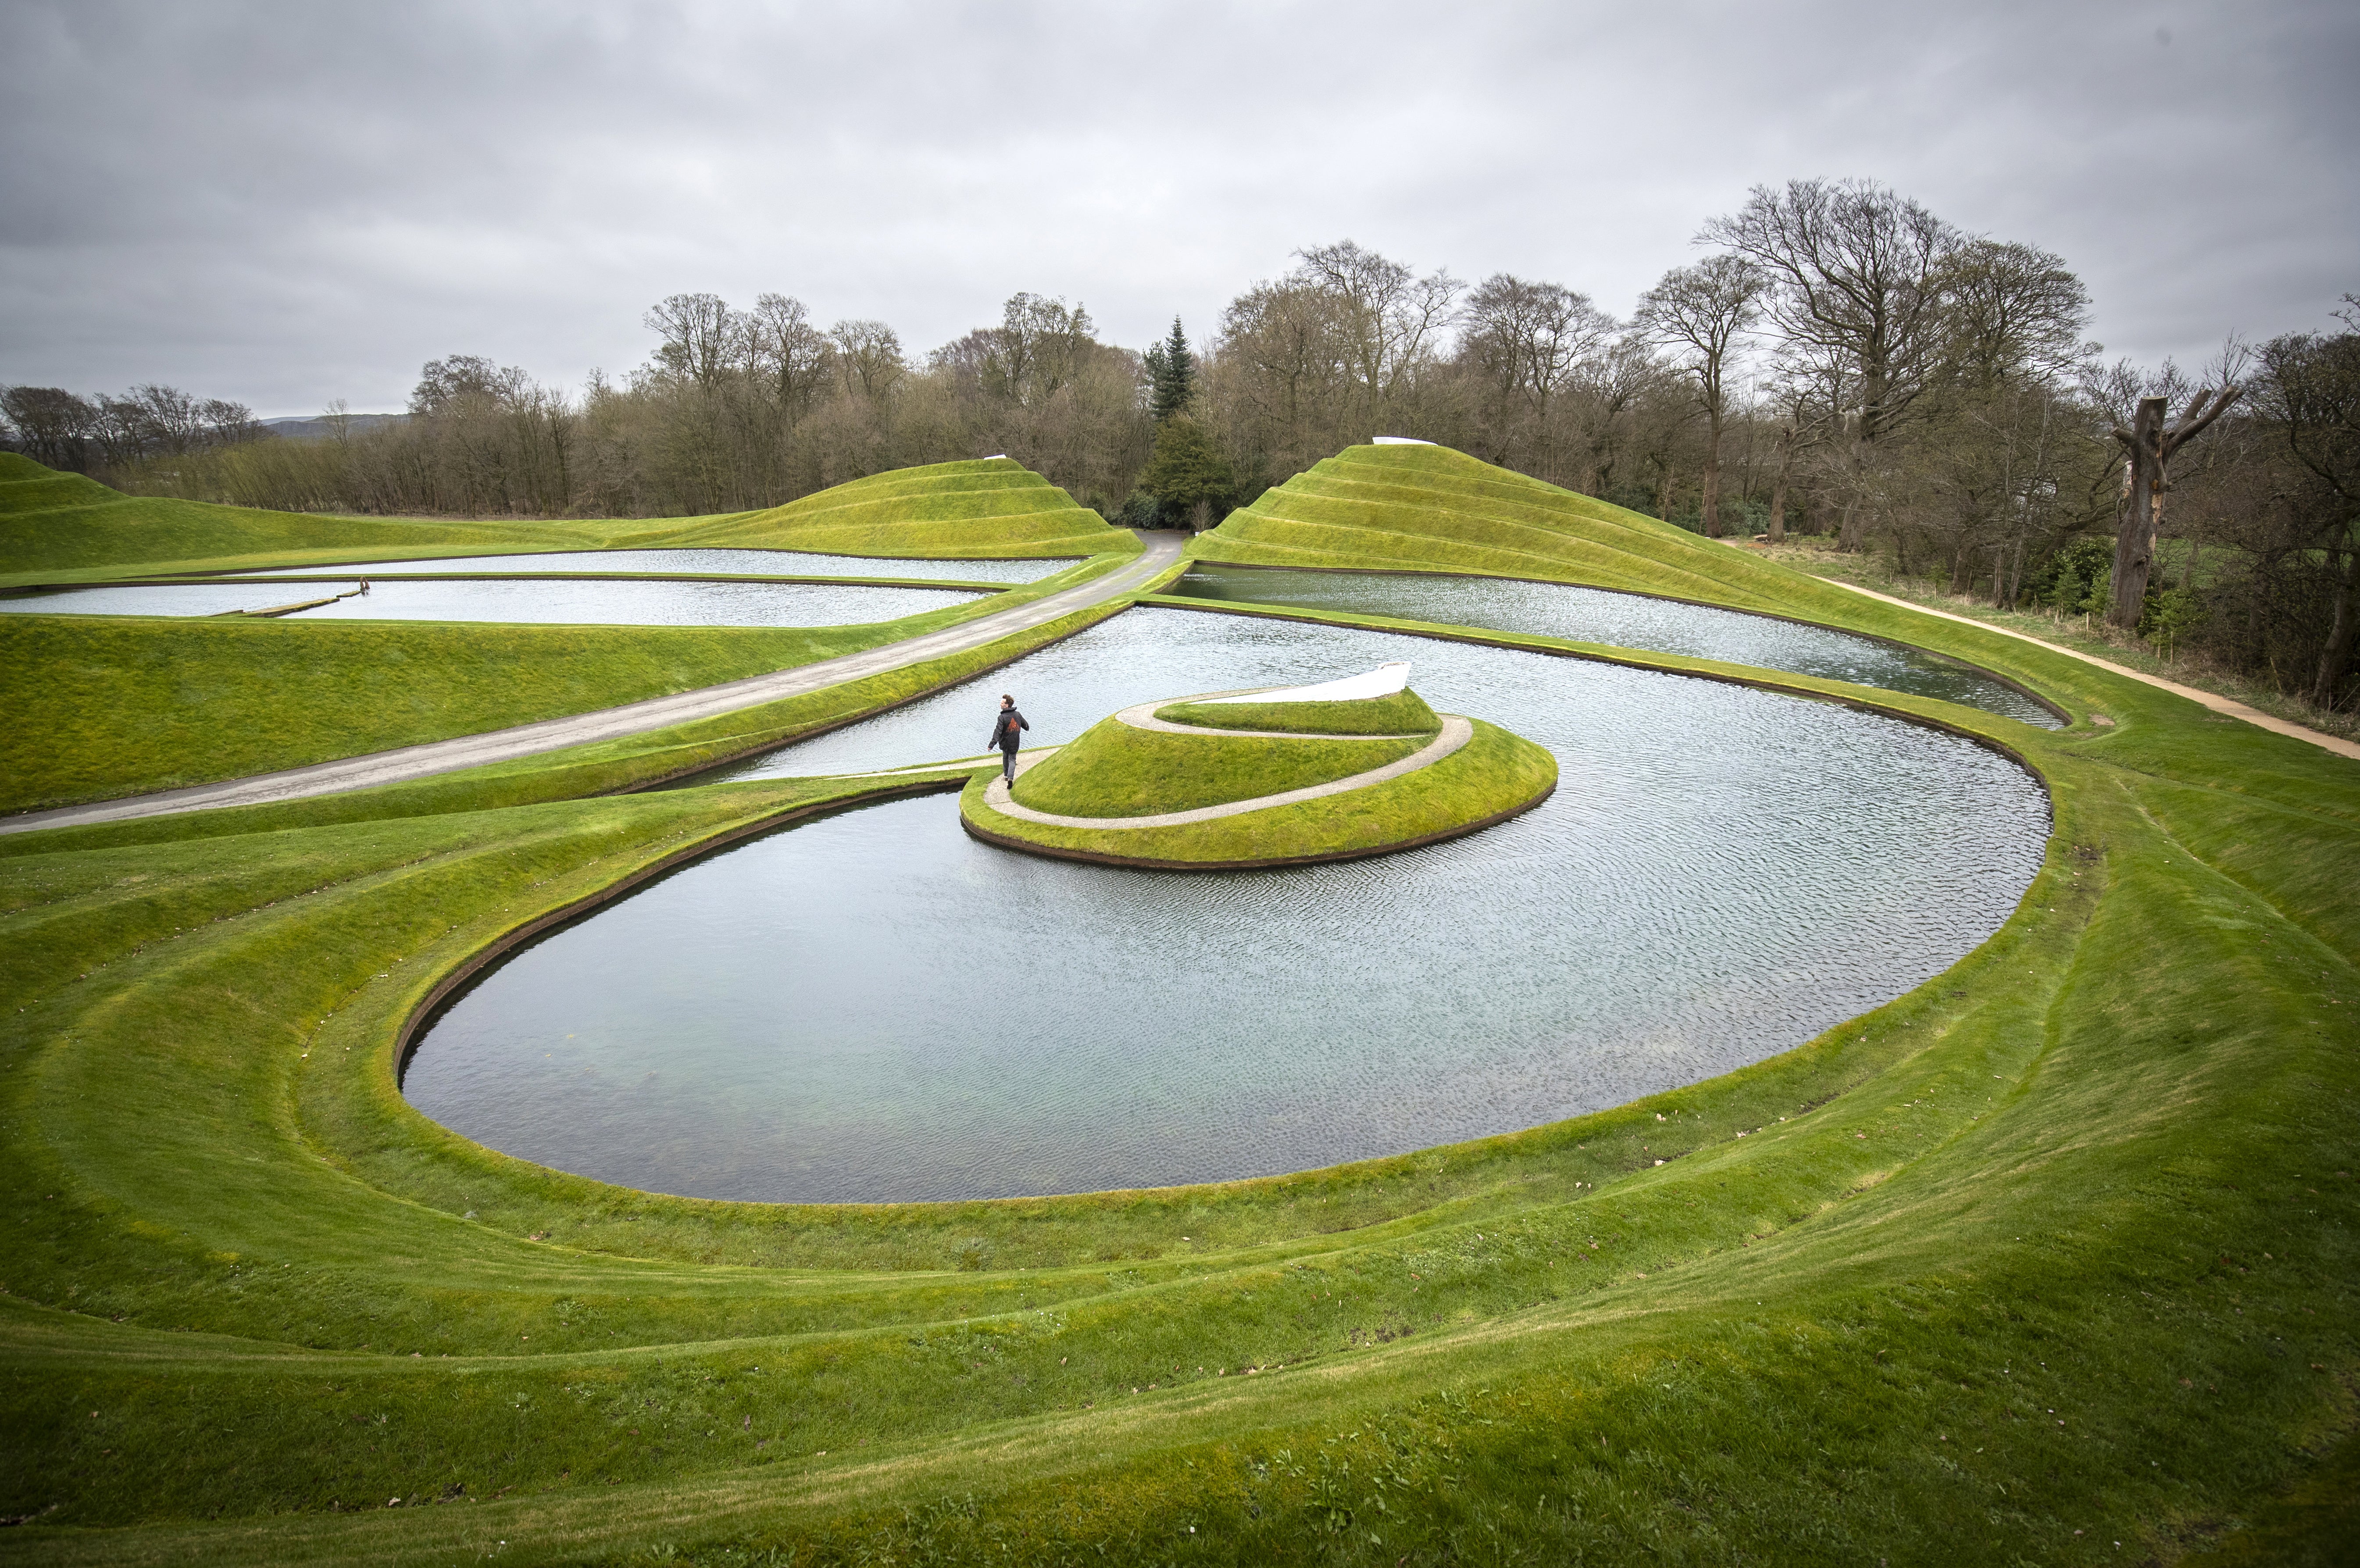 The exhibition is organised by Jupiter Artland, which has a large outdoor arts space near Edinburgh (PA)